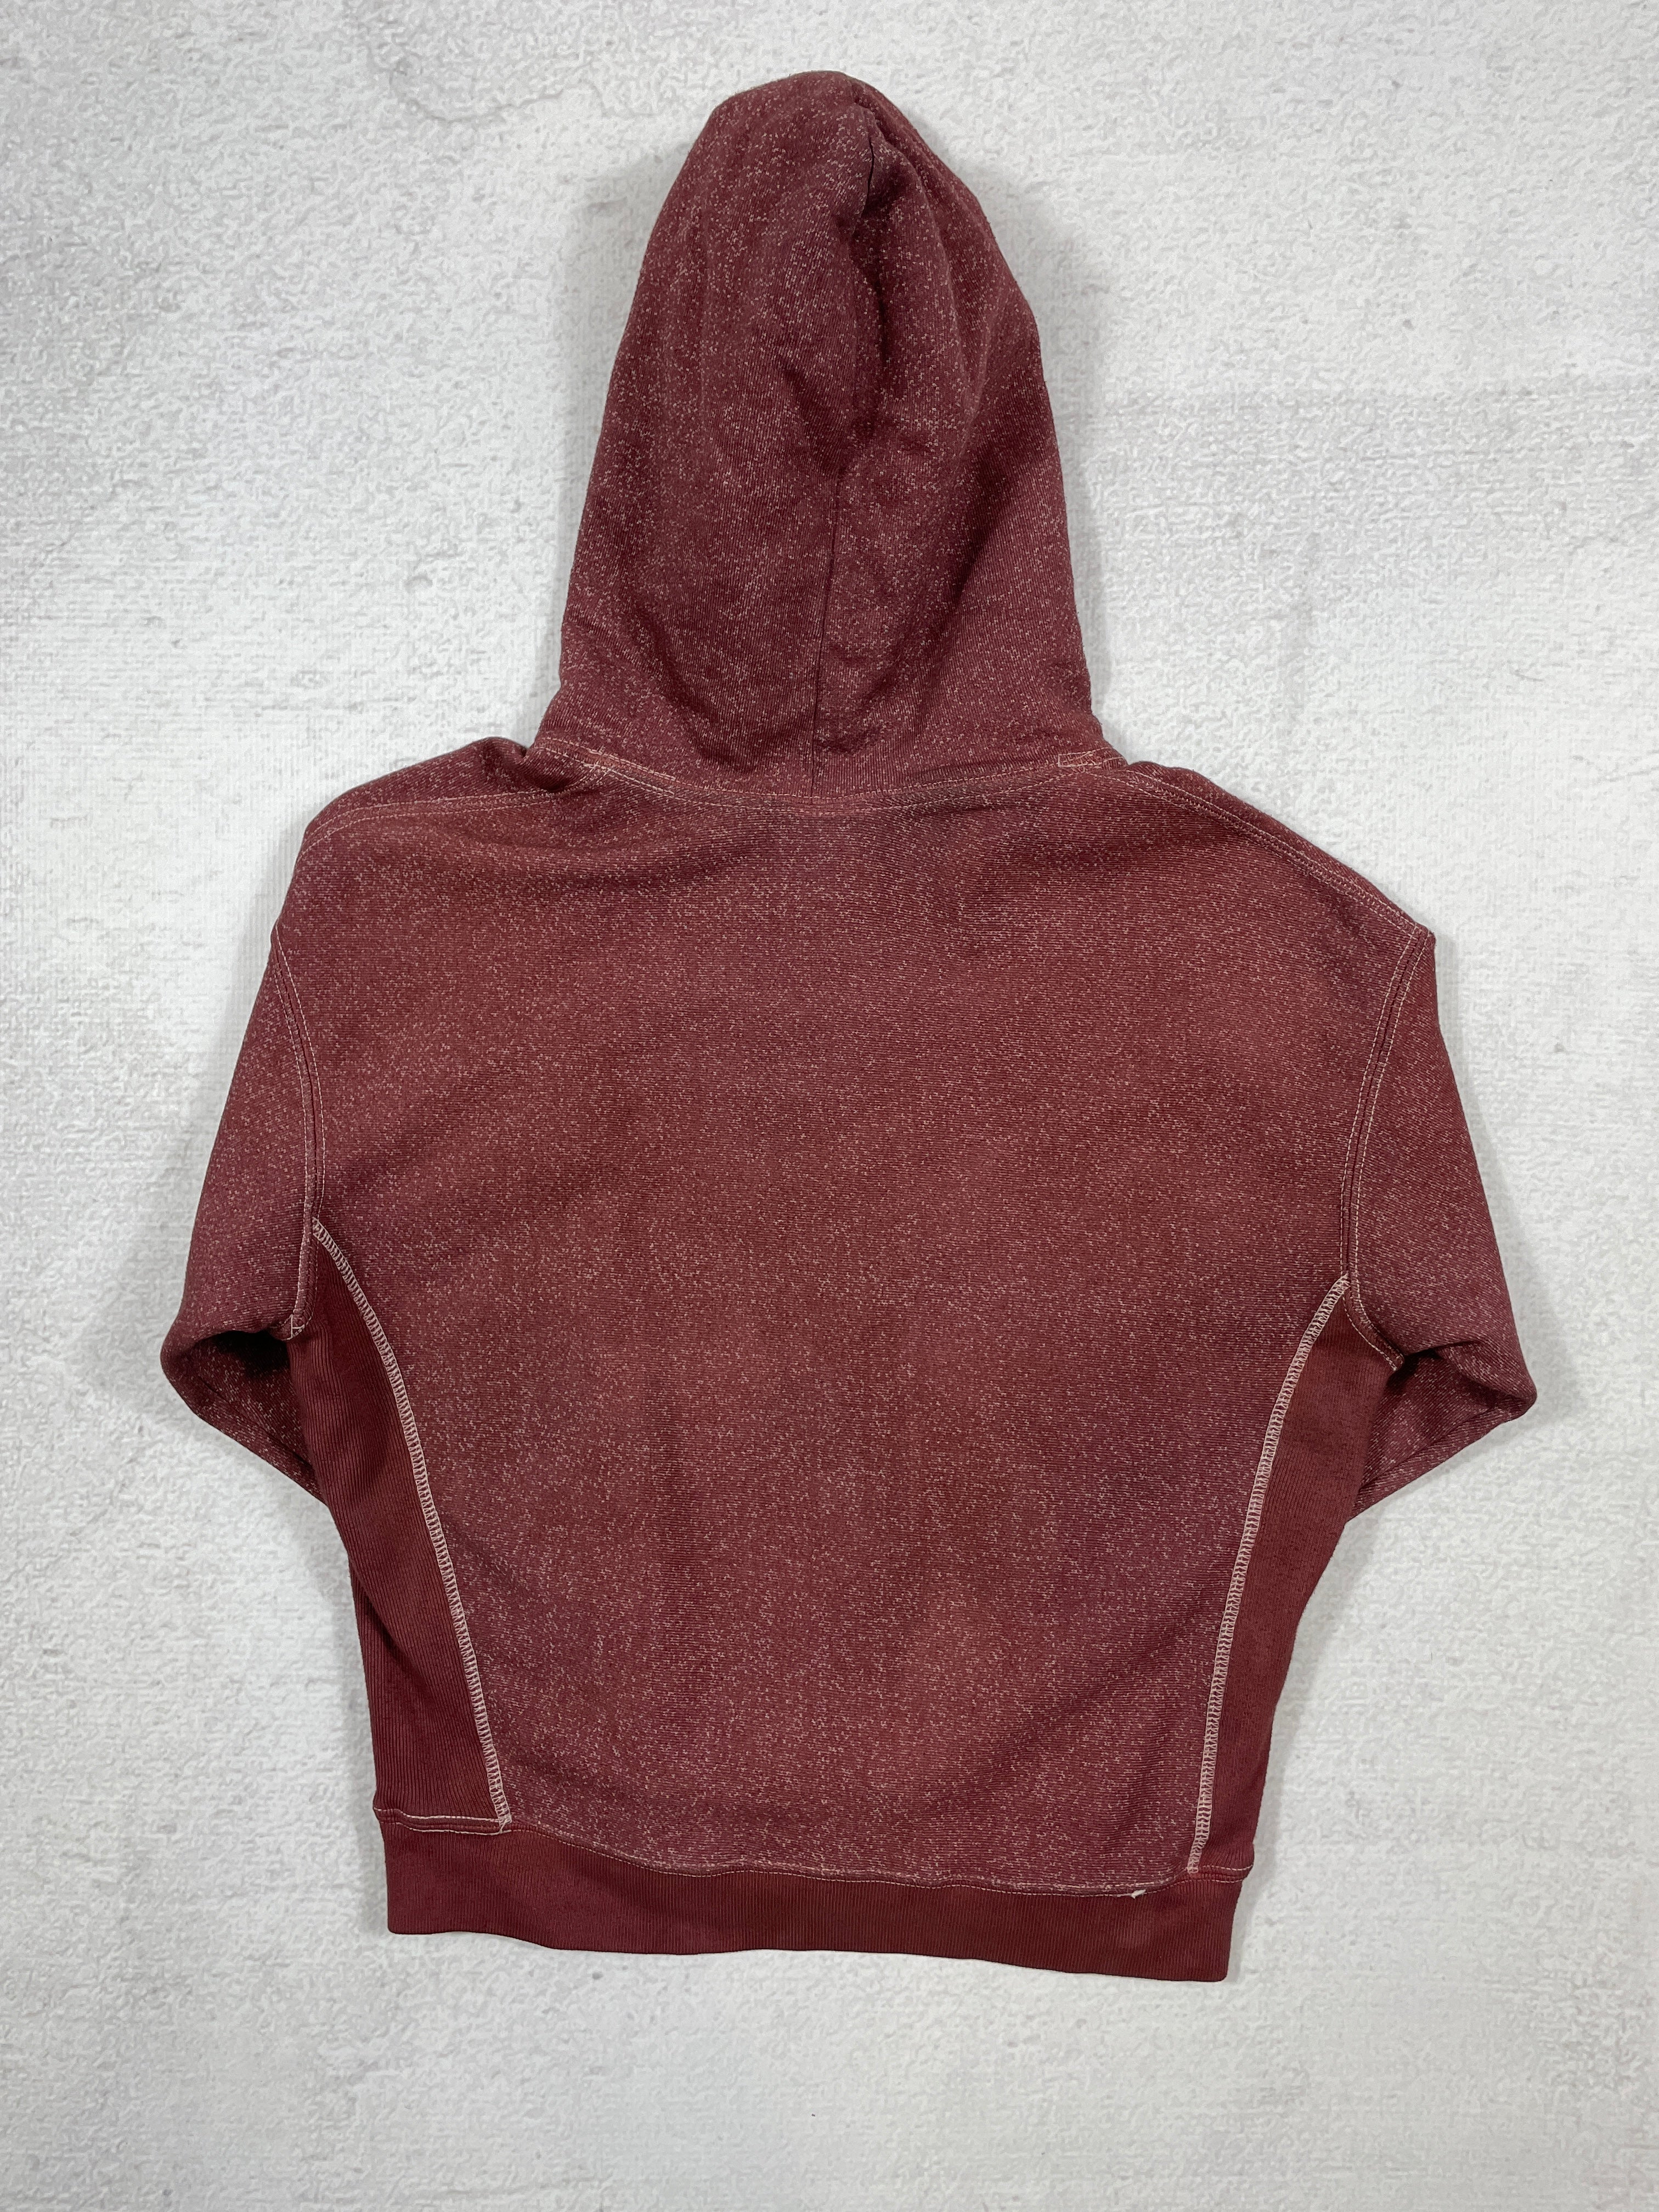 Vintage Dyed Champion Reverse Weave Hoodie - Men's Small